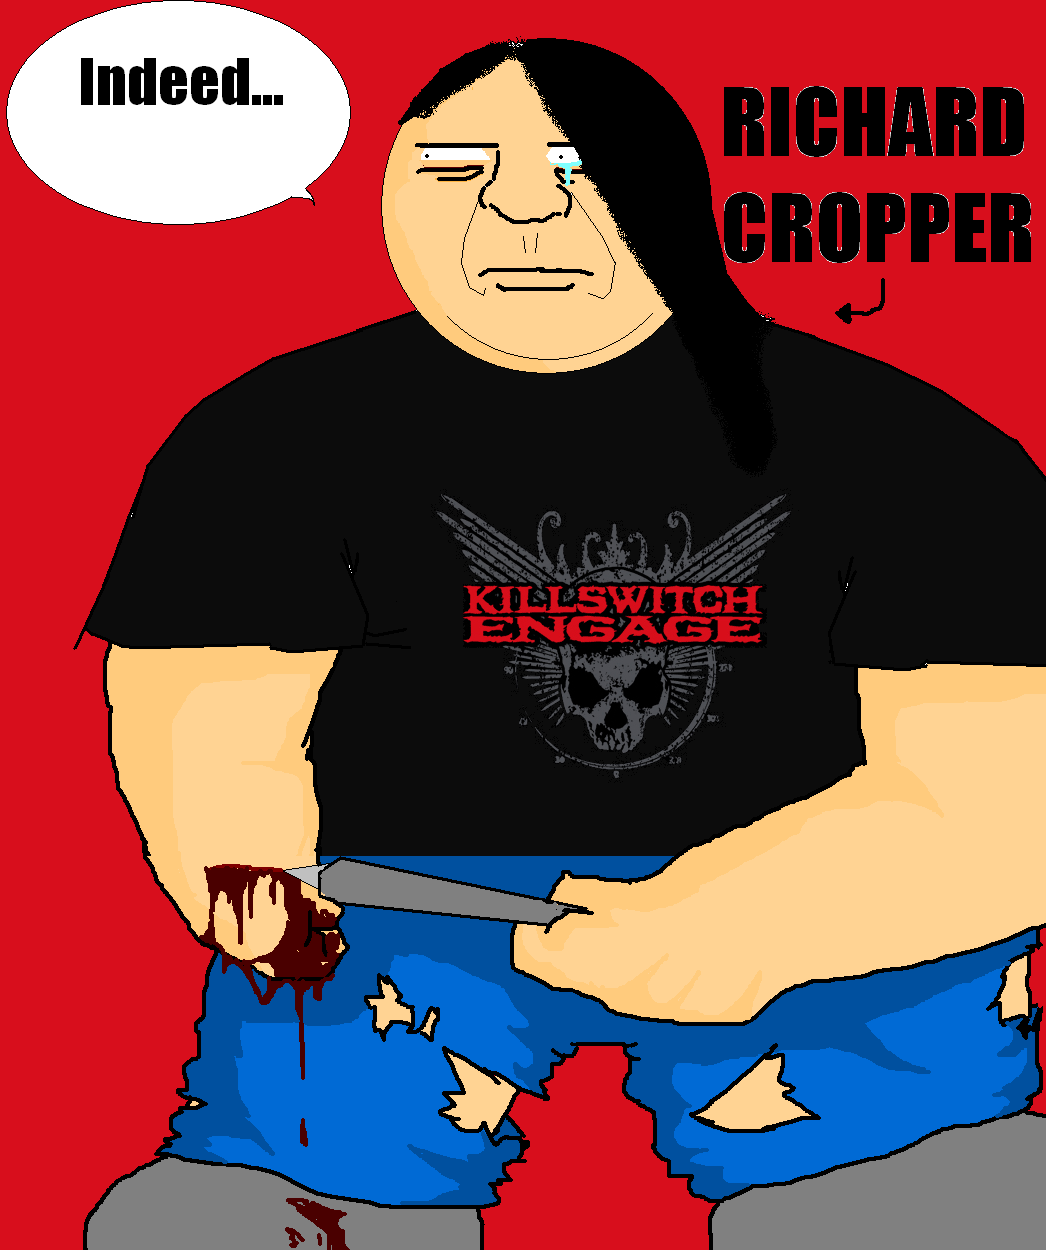 "Portrait of sexy Richard Cropper. He's a black man and is from Africa." [Quoted from my facebook]